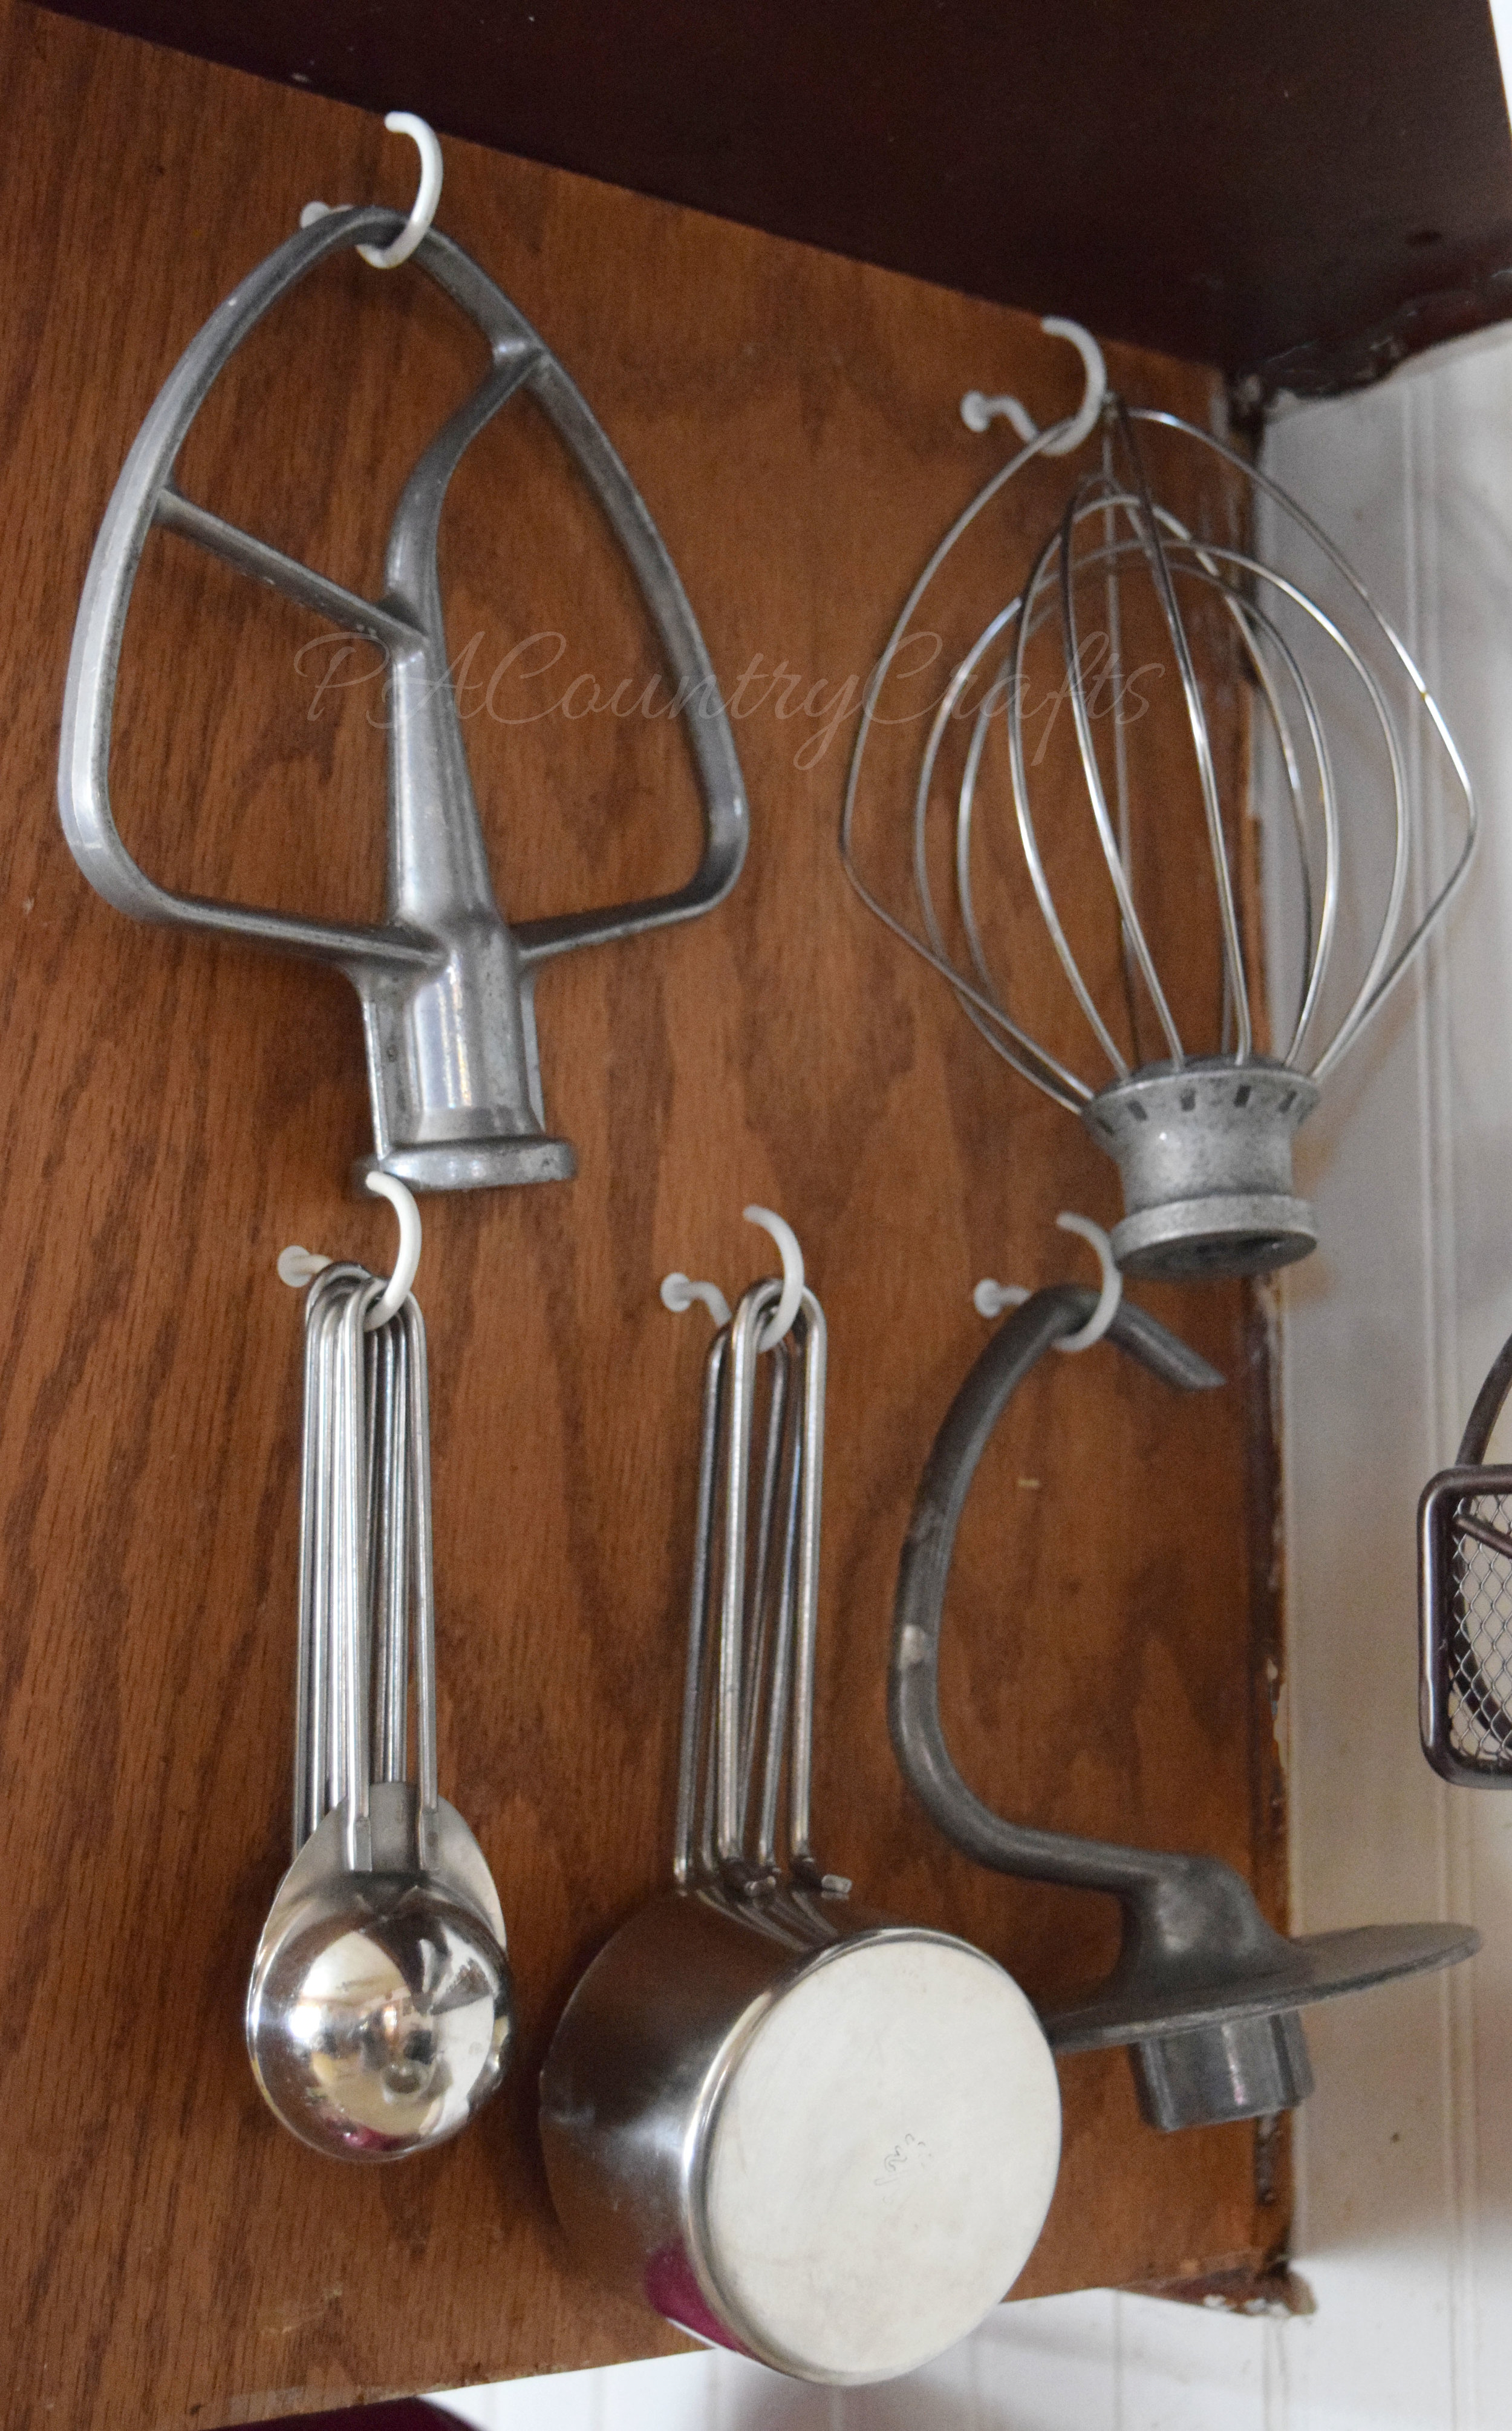 Hang mixer attachments and measuring cups from hooks on the side of a cupboard.